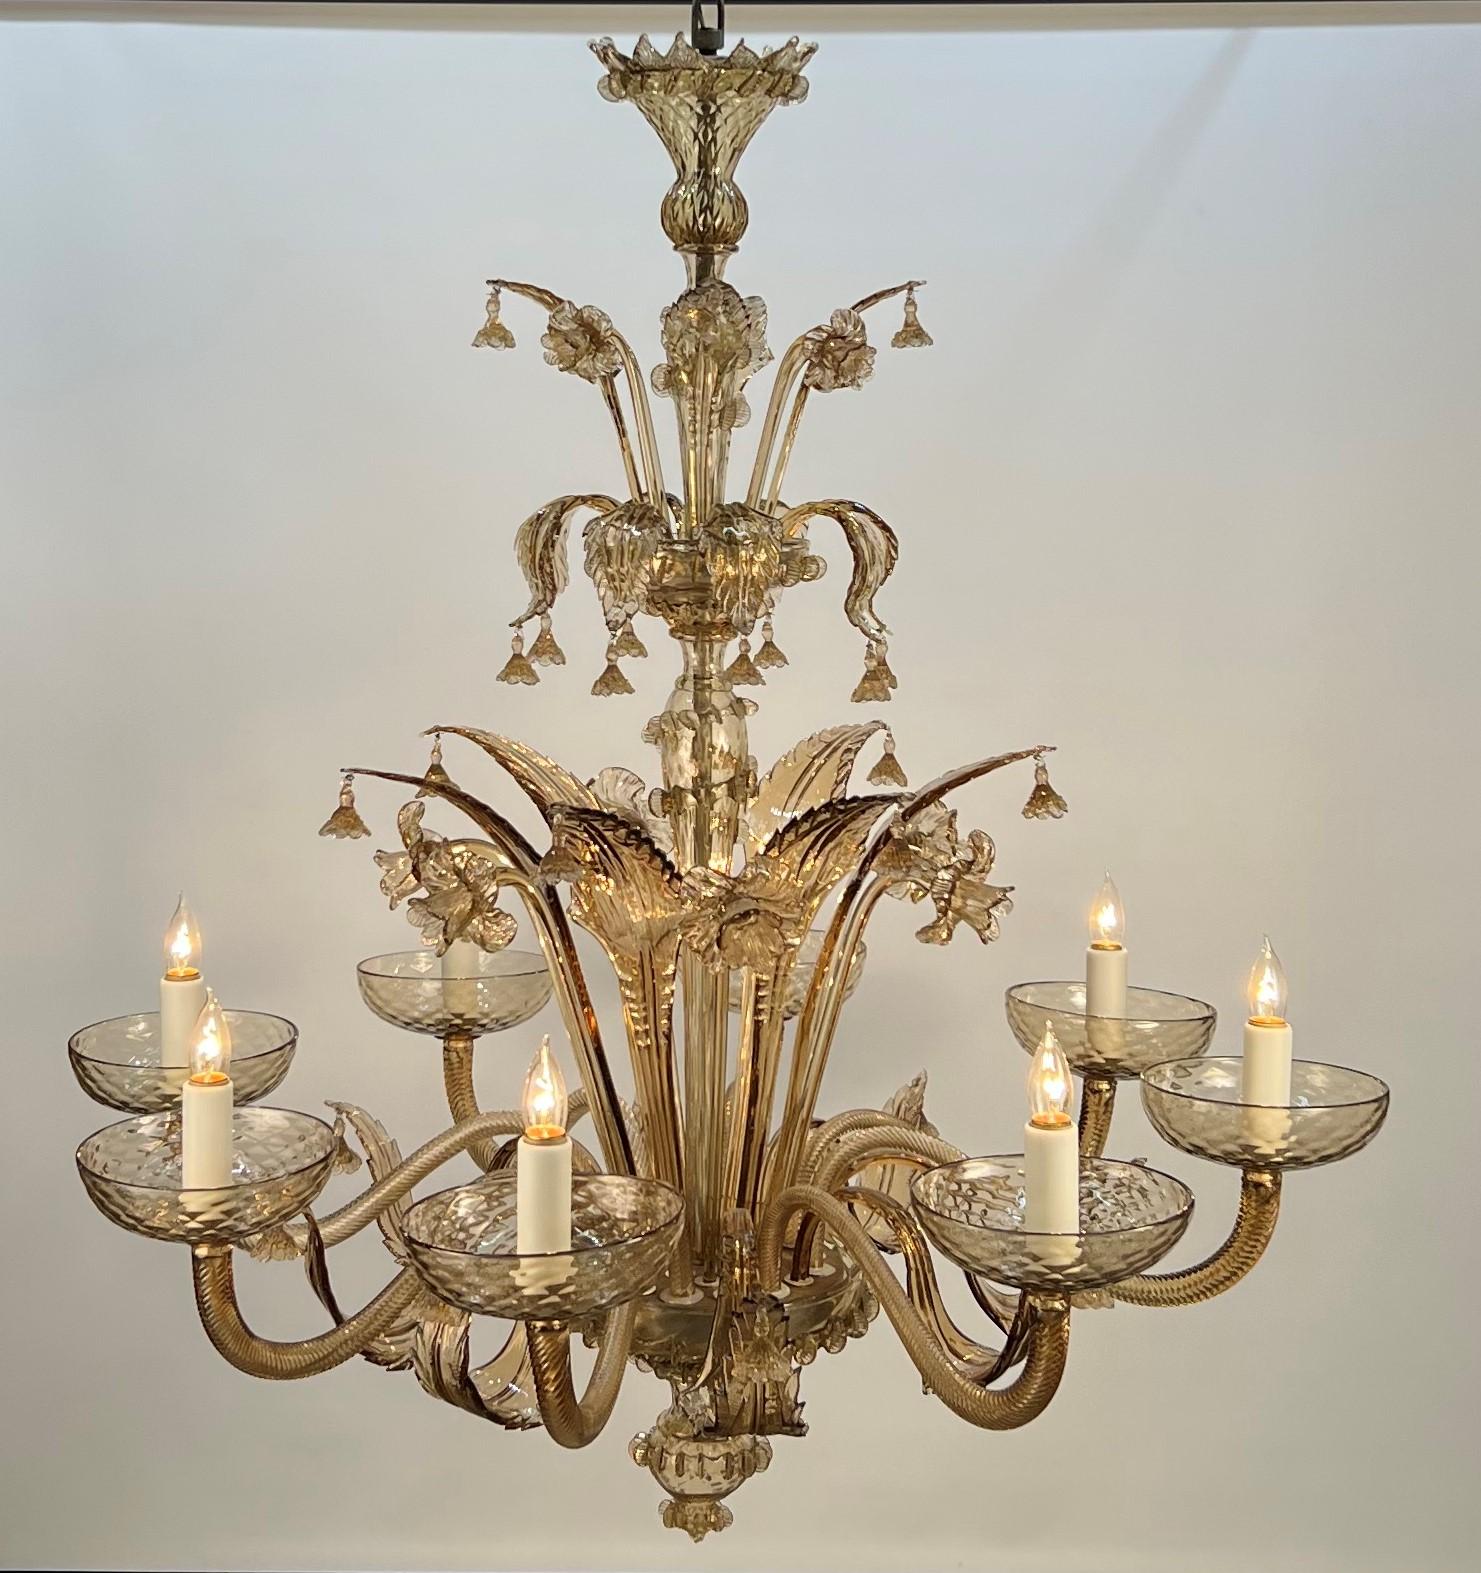 Presented is a beautiful large scale Murano chandelier in the Venetian taste. It embodies the core of classic Murano hand blowing and molding techniques. The amber glass is clear and rich in color without any gold flecks usually associated with